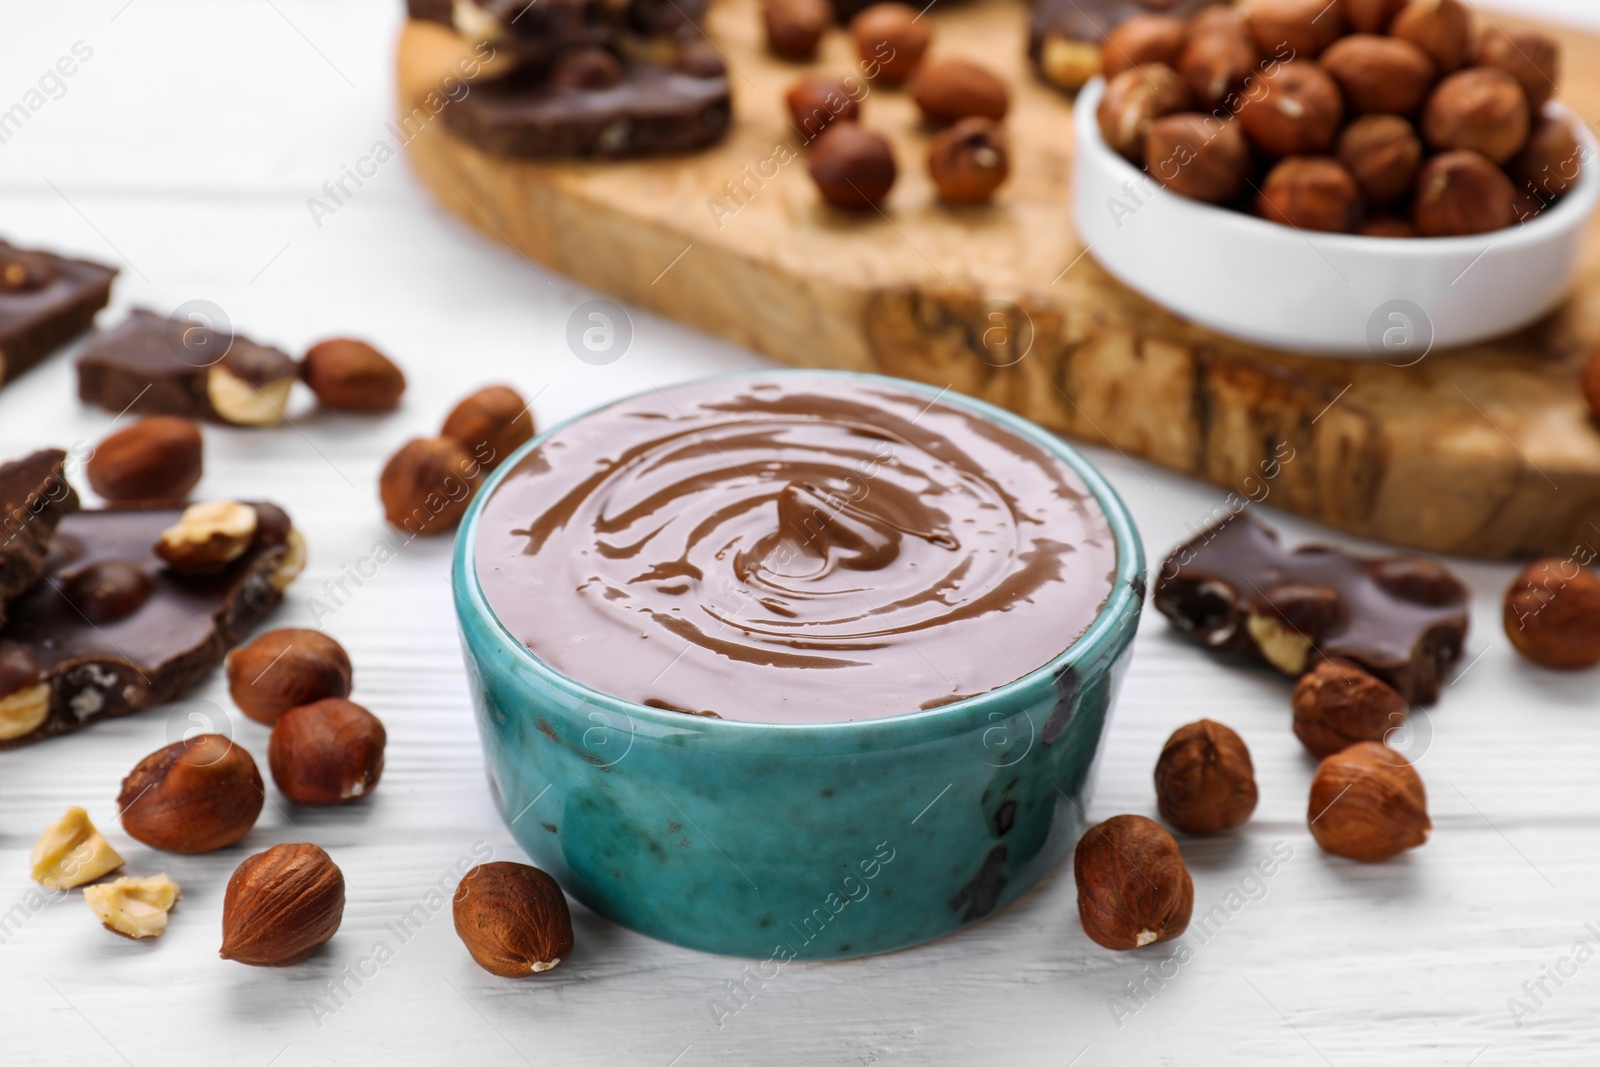 Photo of Bowl with tasty paste, chocolate pieces and nuts on white wooden table